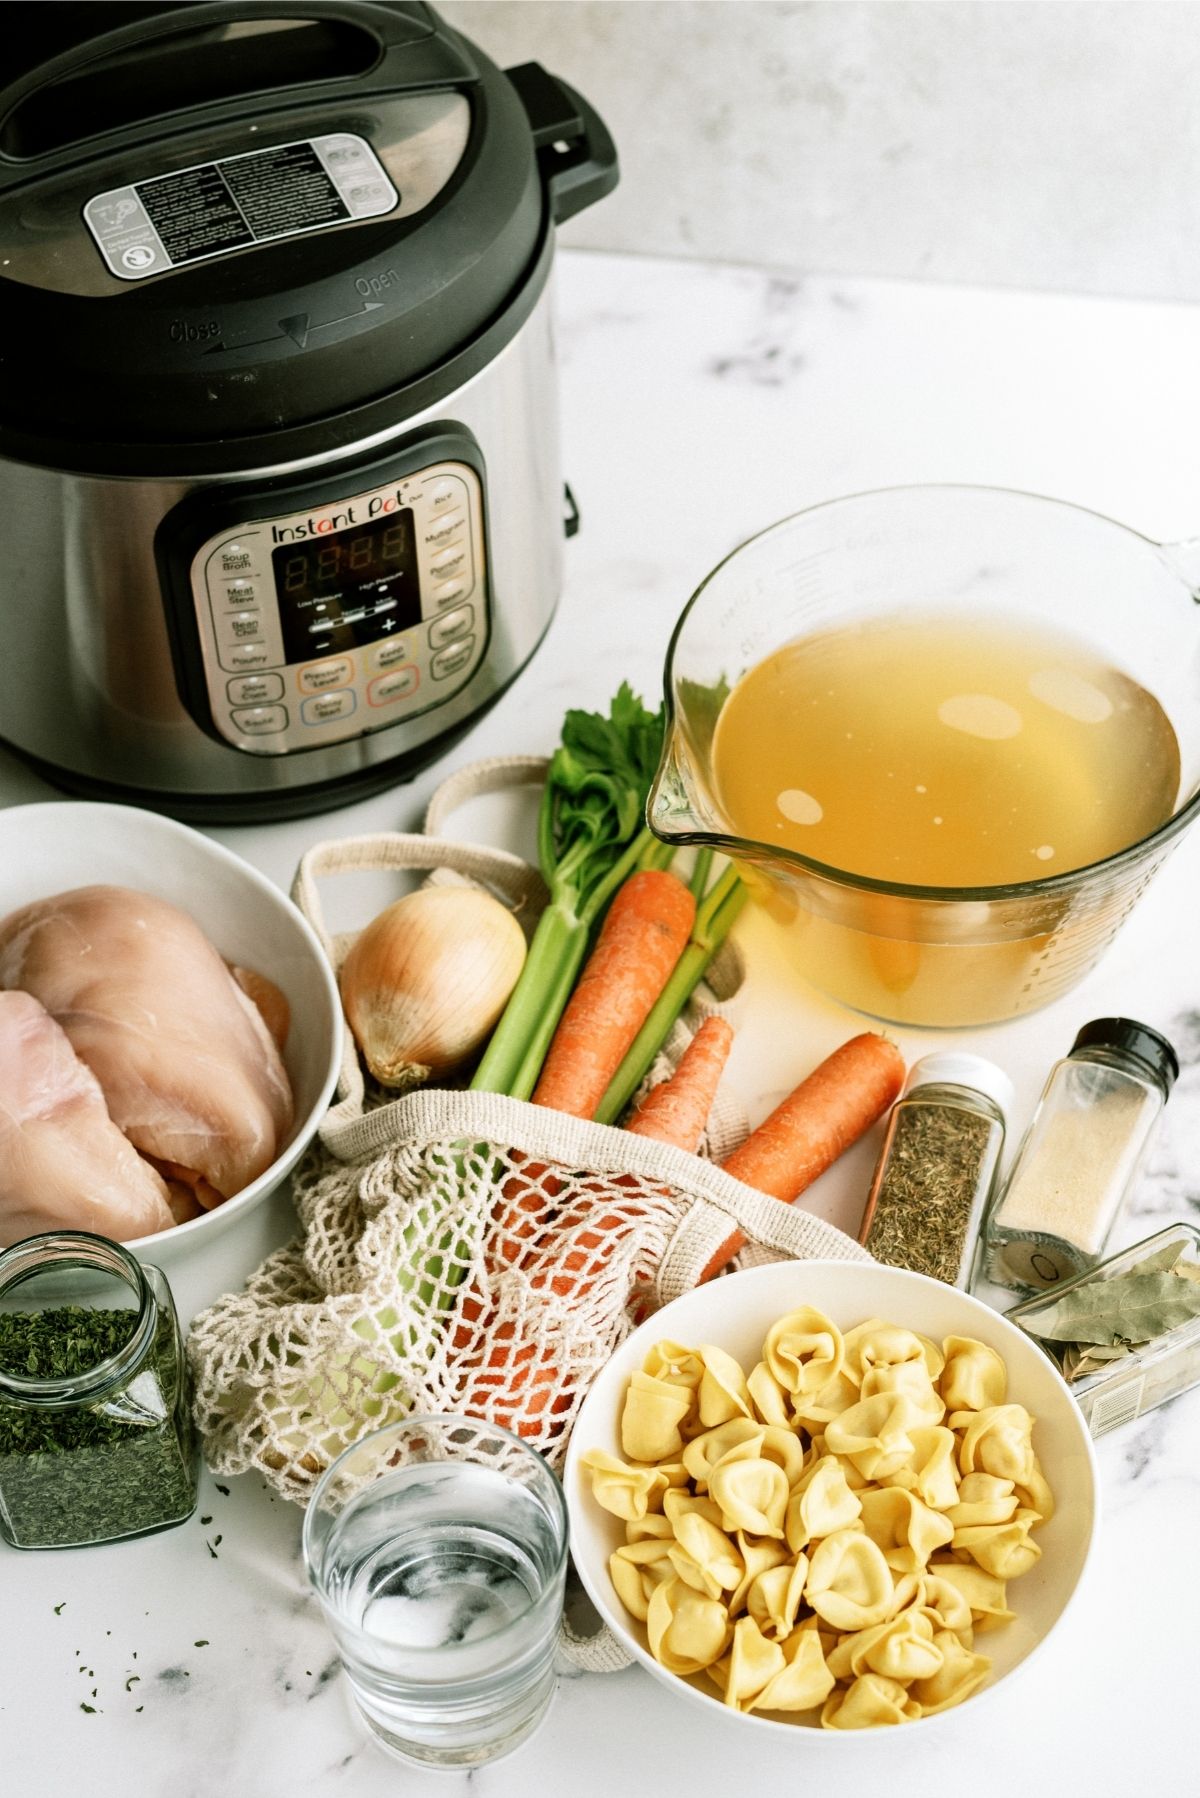 Ingredients for Instant Pot Chicken Tortellini and Vegetable Soup